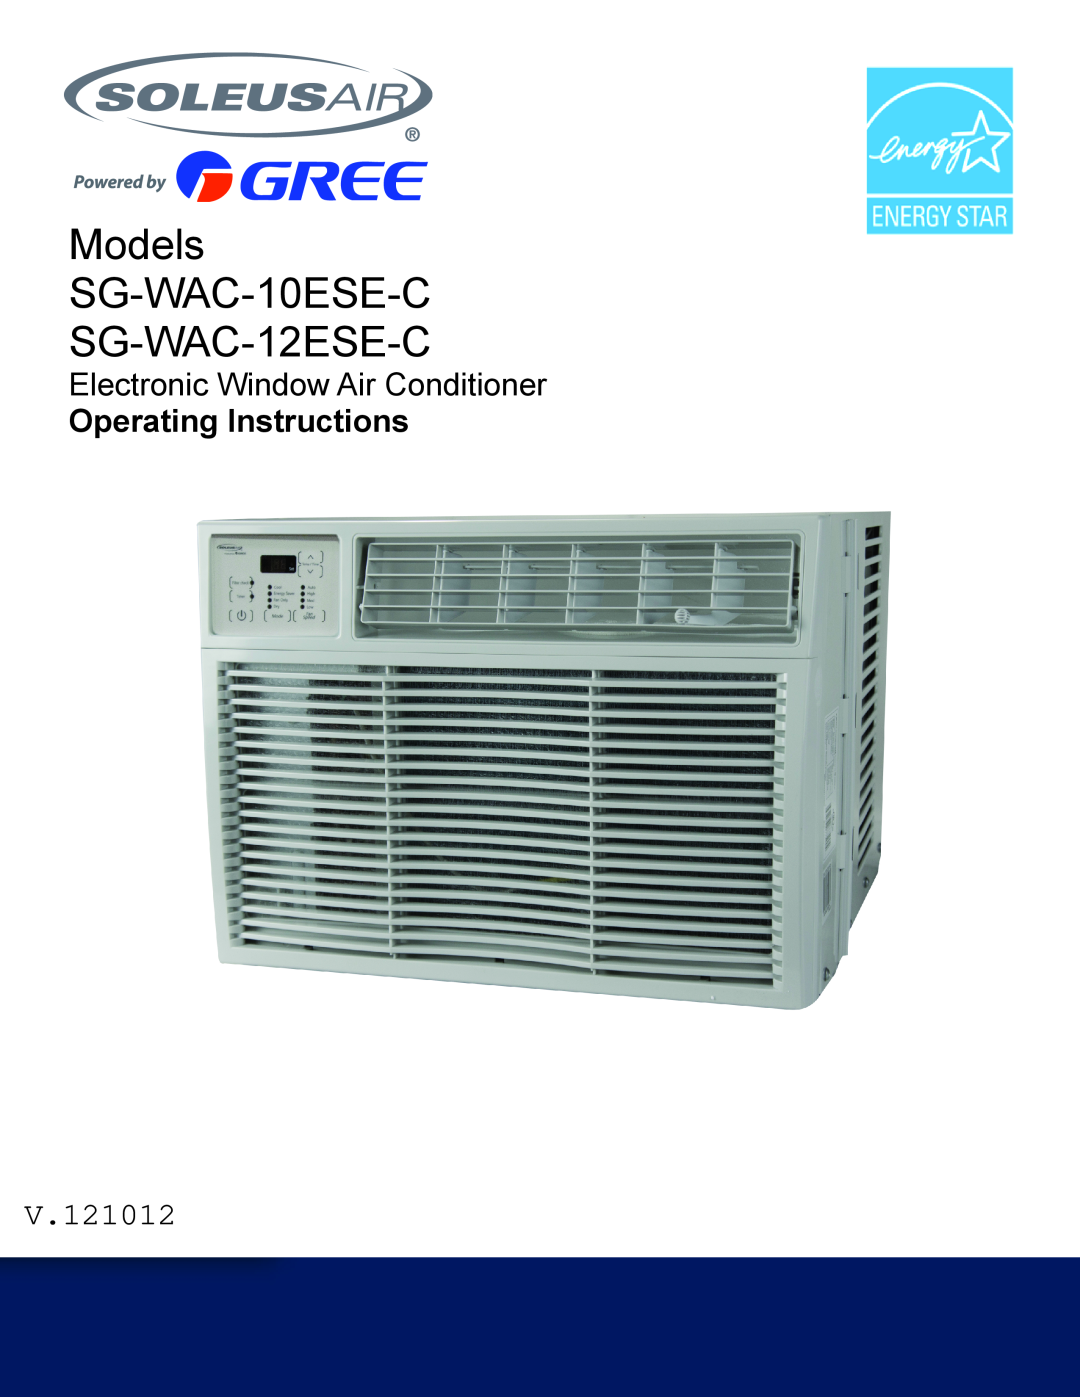 Soleus Air operating instructions Models SG-WAC-10ESE-C SG-WAC-12ESE-C, Electronic Window Air Conditioner, V.12101 